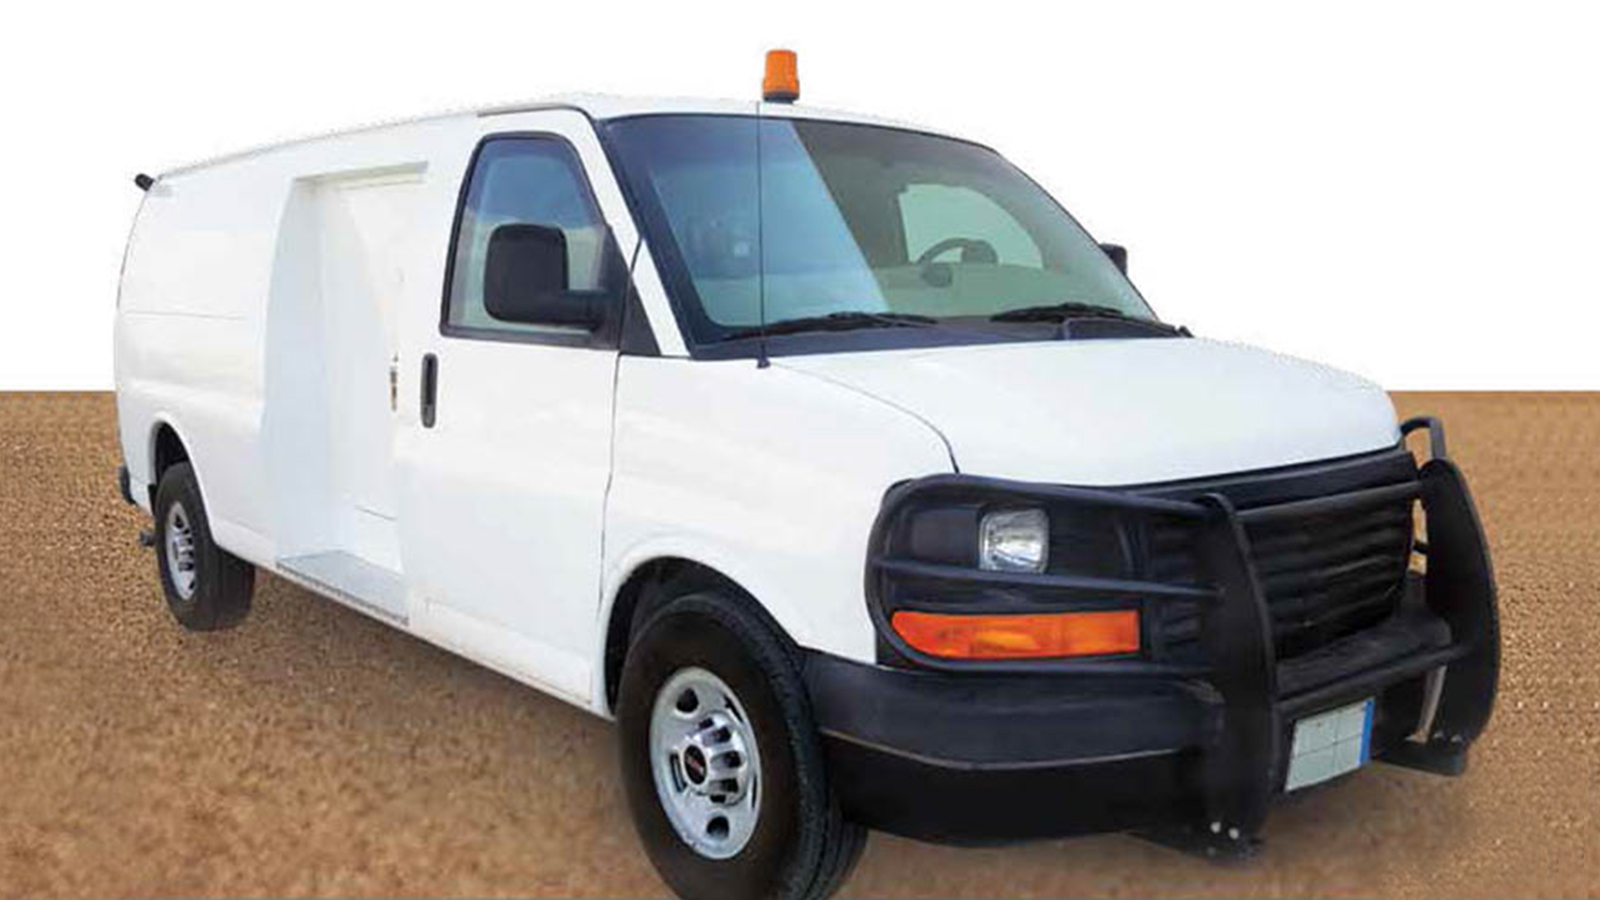 CASH IN TRANSIT ARMOURED VEHICLE